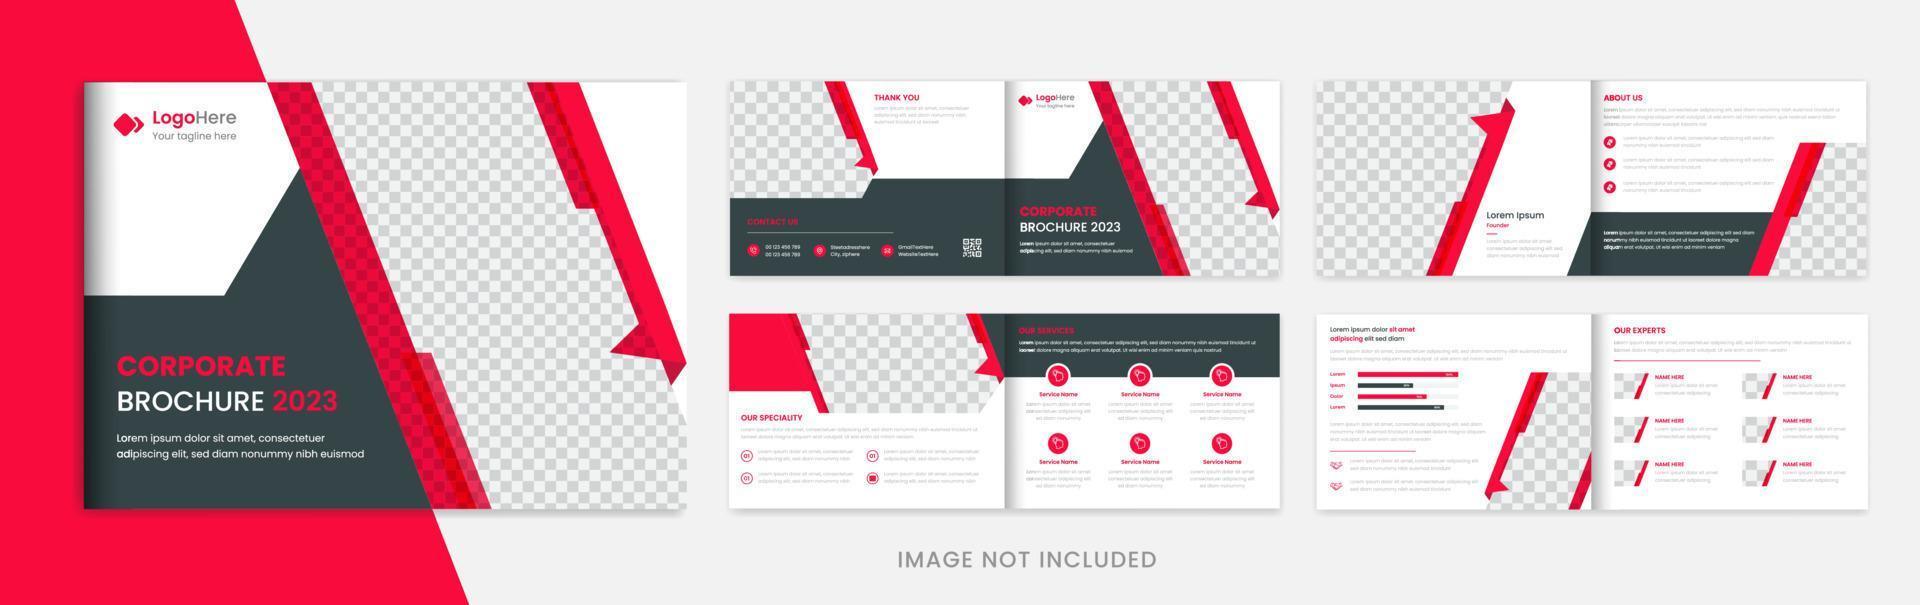 Landscape Corporate brochure design template with creative red shapes for business flyer, poster, leaflet, banner vector